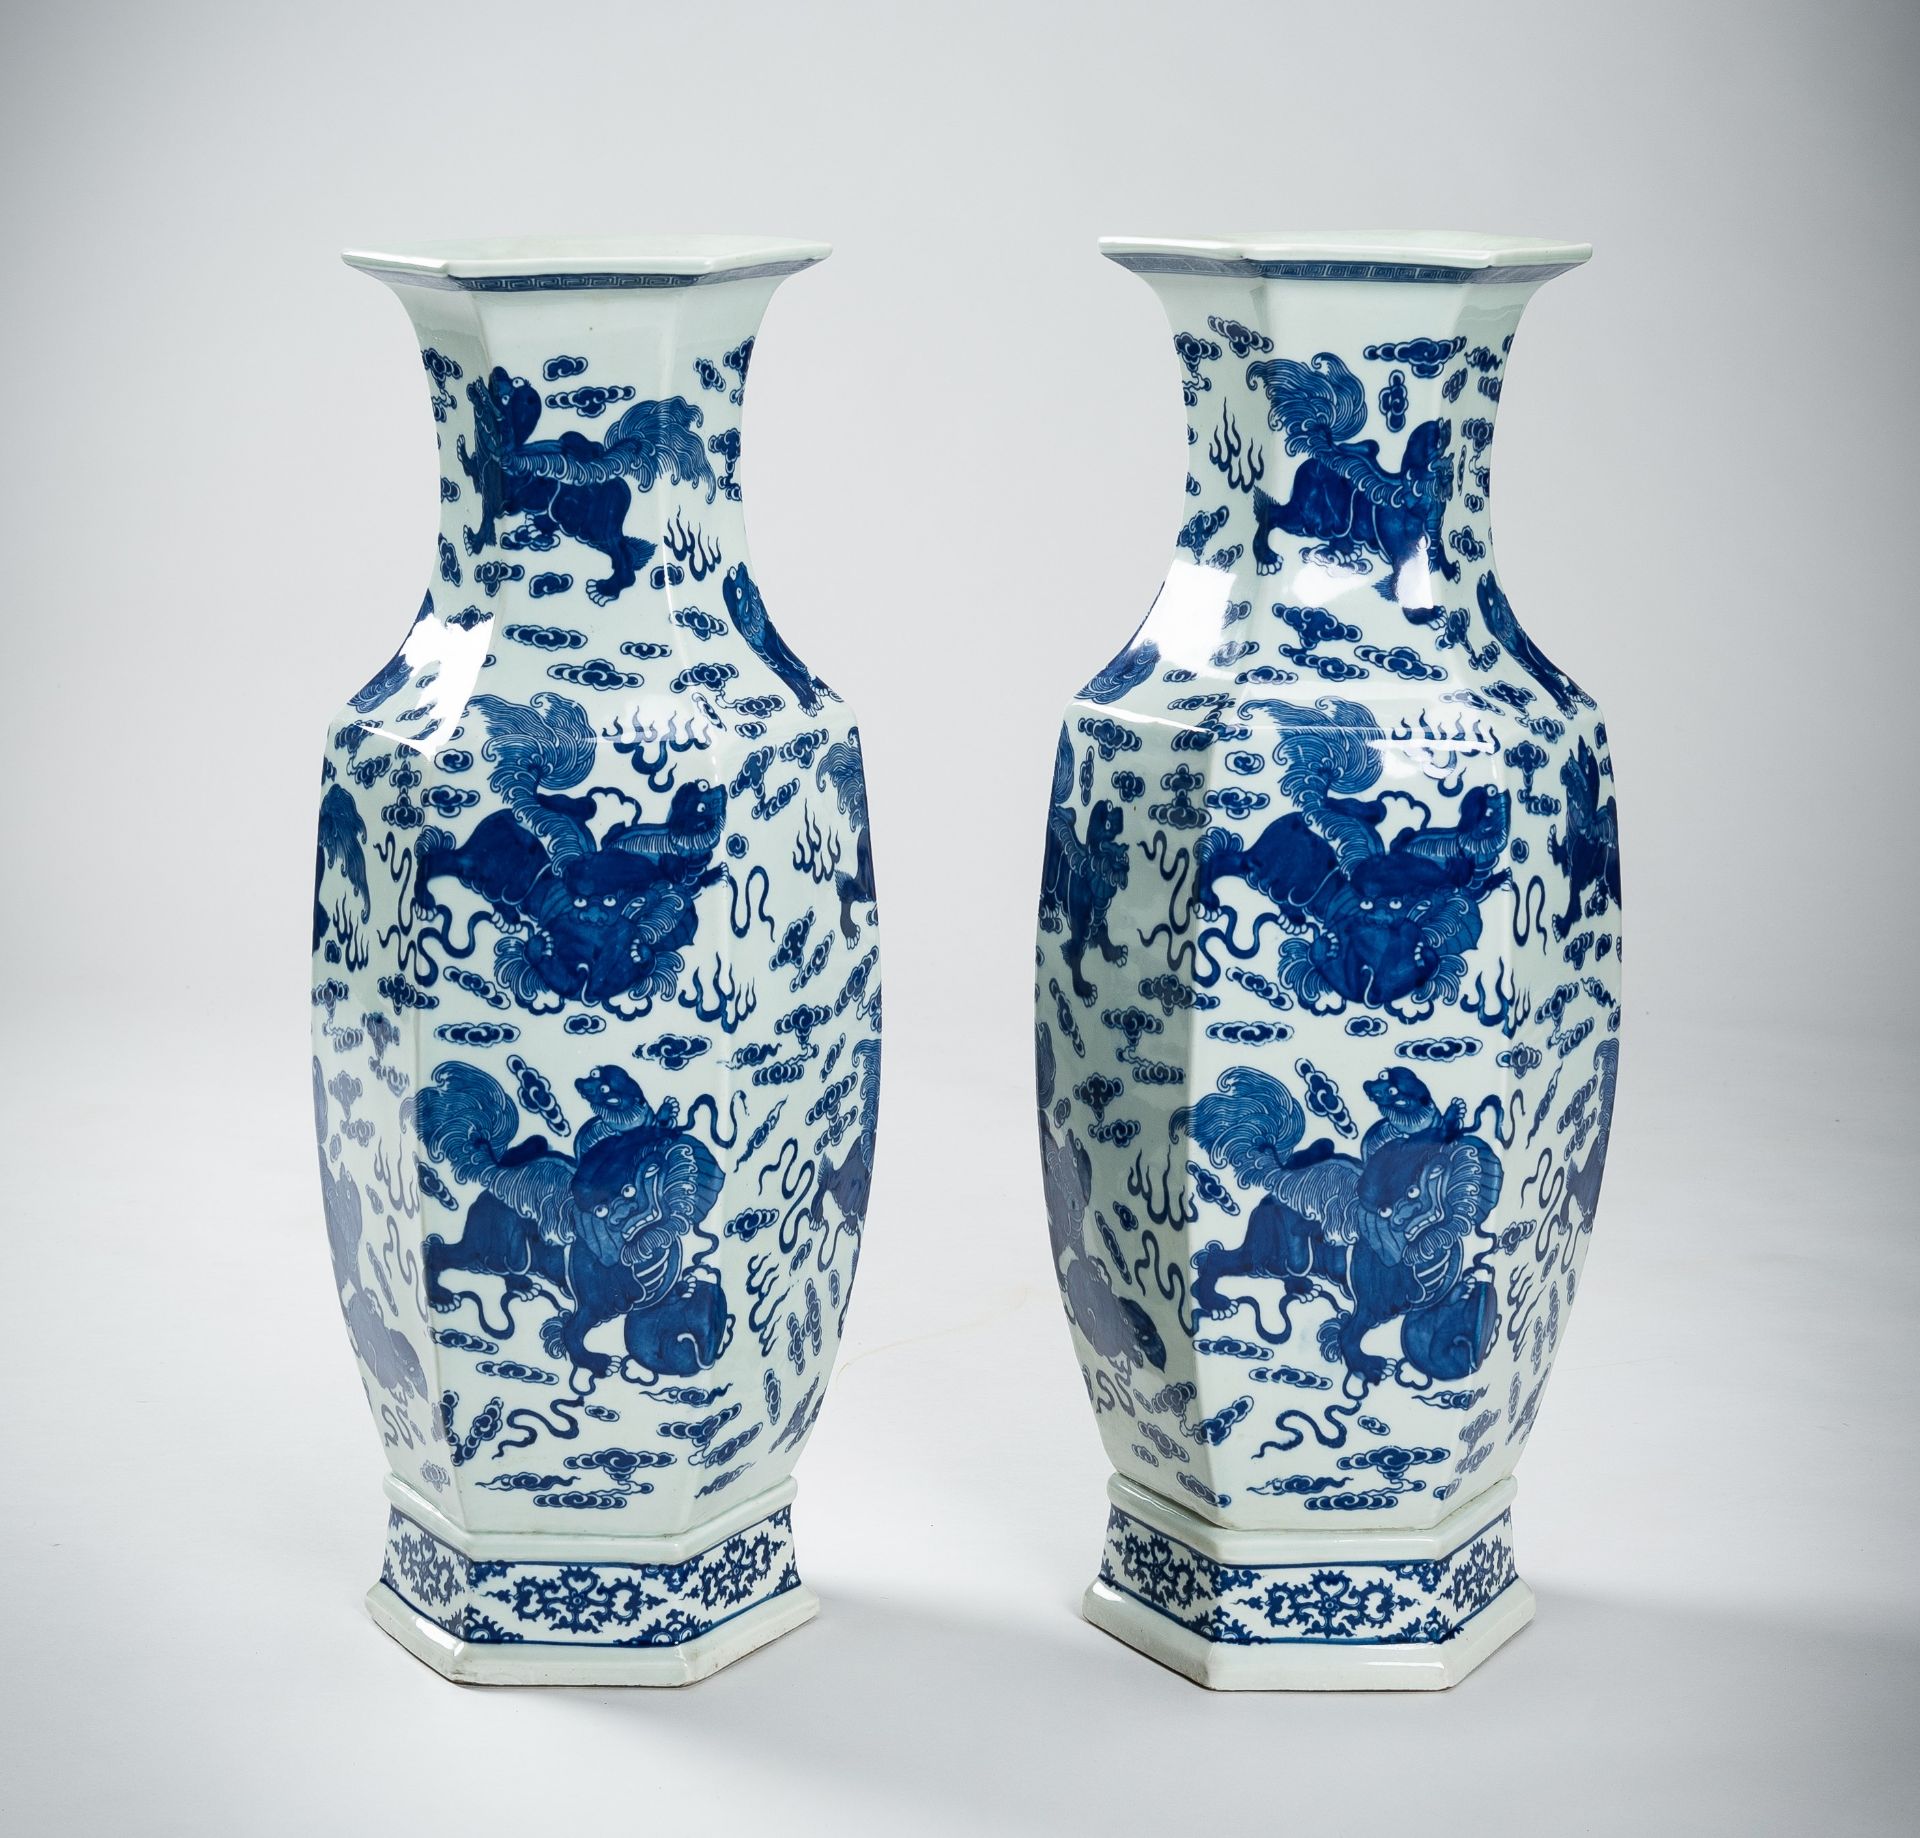 A LARGE PAIR OF BLUE AND WHITE PORCELAIN VASES WITH BUDDHIST LIONS, QING